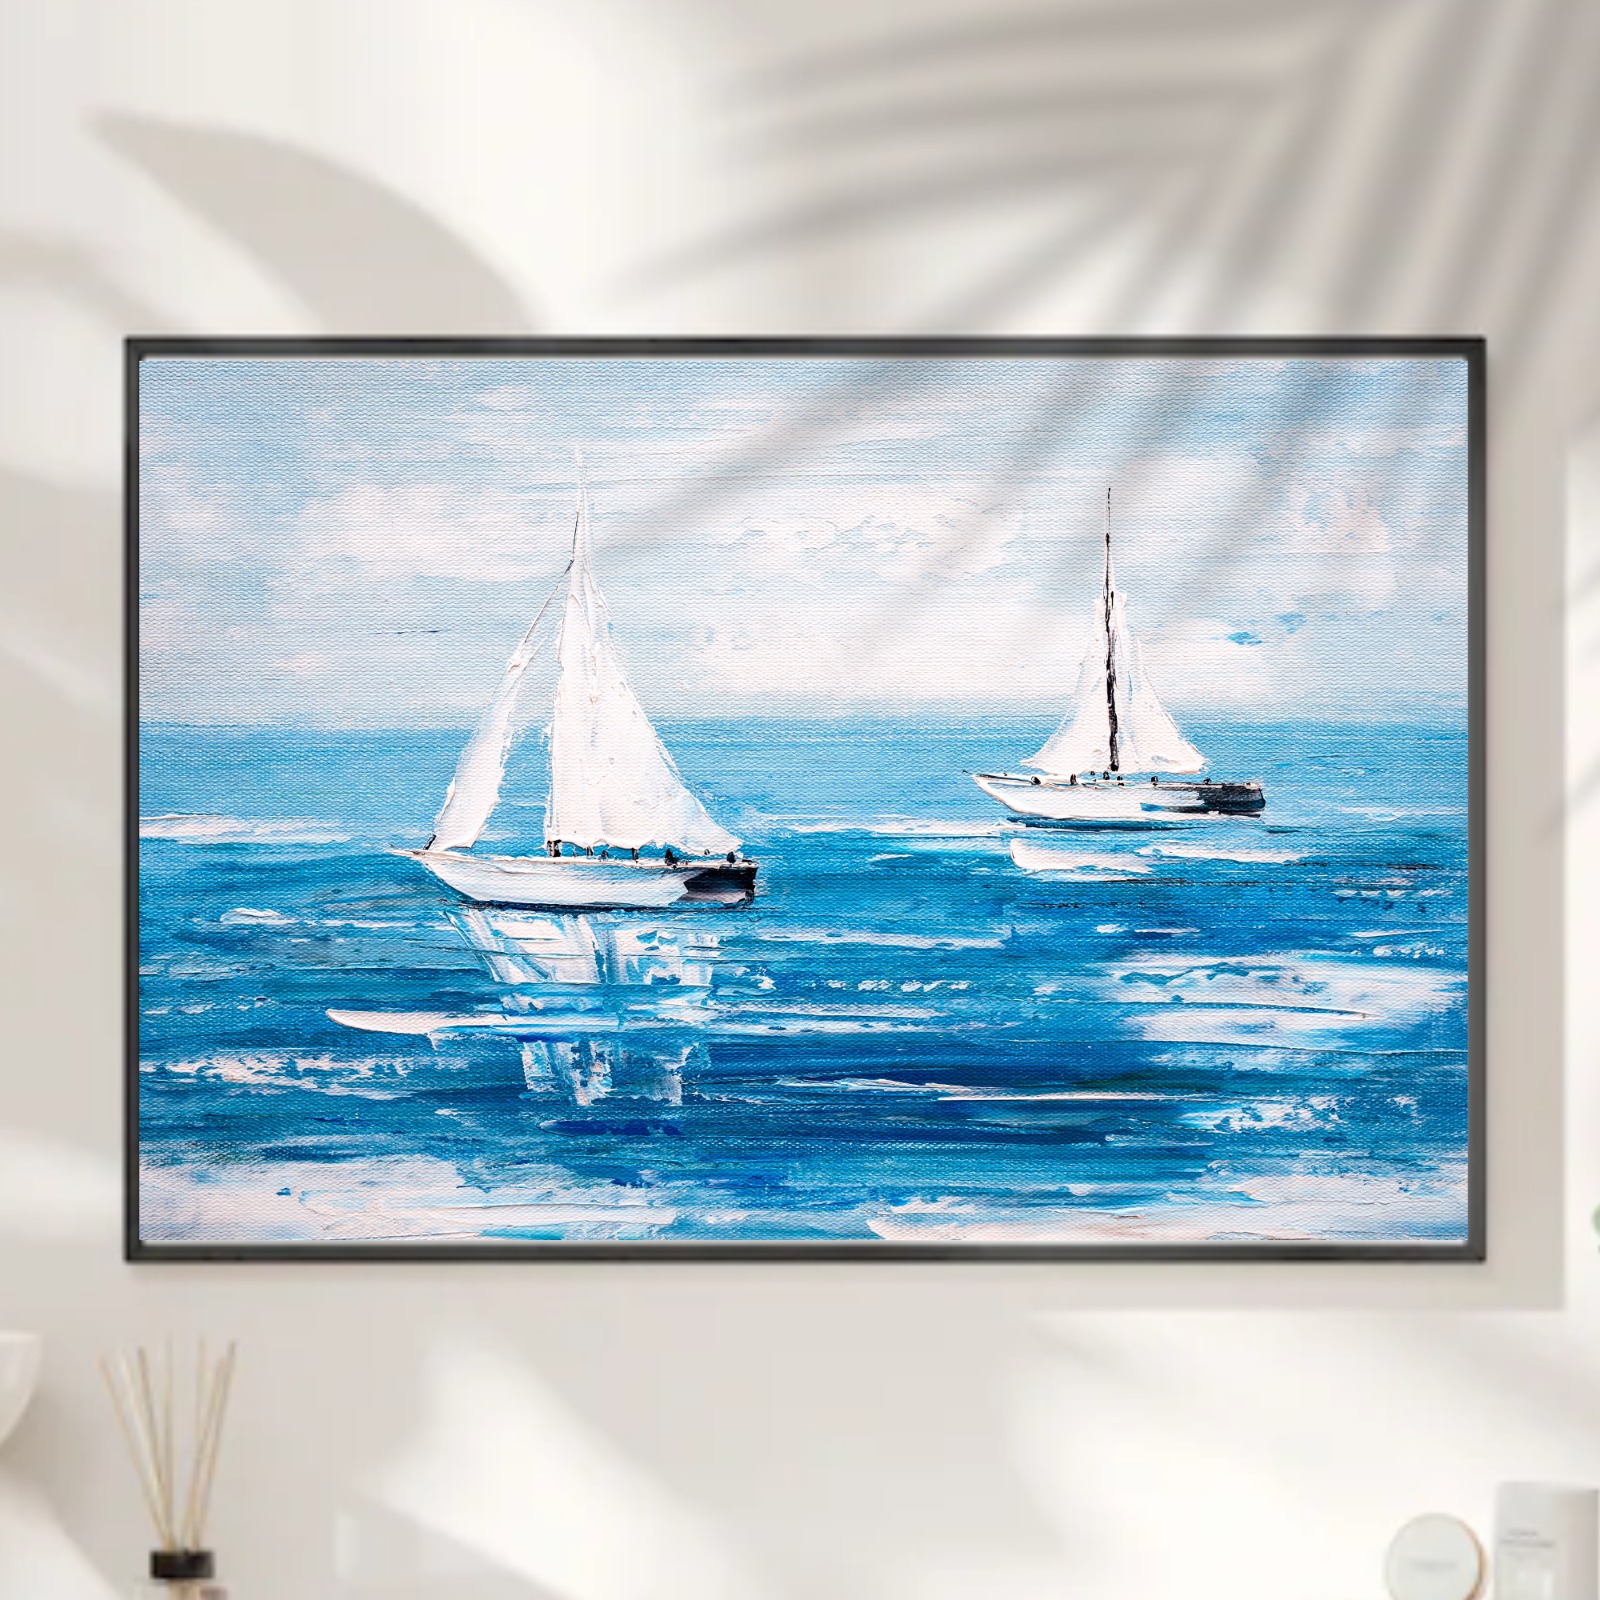 <p><a target="_blank" rel="noopener noreferrer nofollow" href="https://pickygallery.com/en/shop/Beach-house-frames"><span style="color: rgb(33, 37, 41)">Summer Collection</span></a></p>